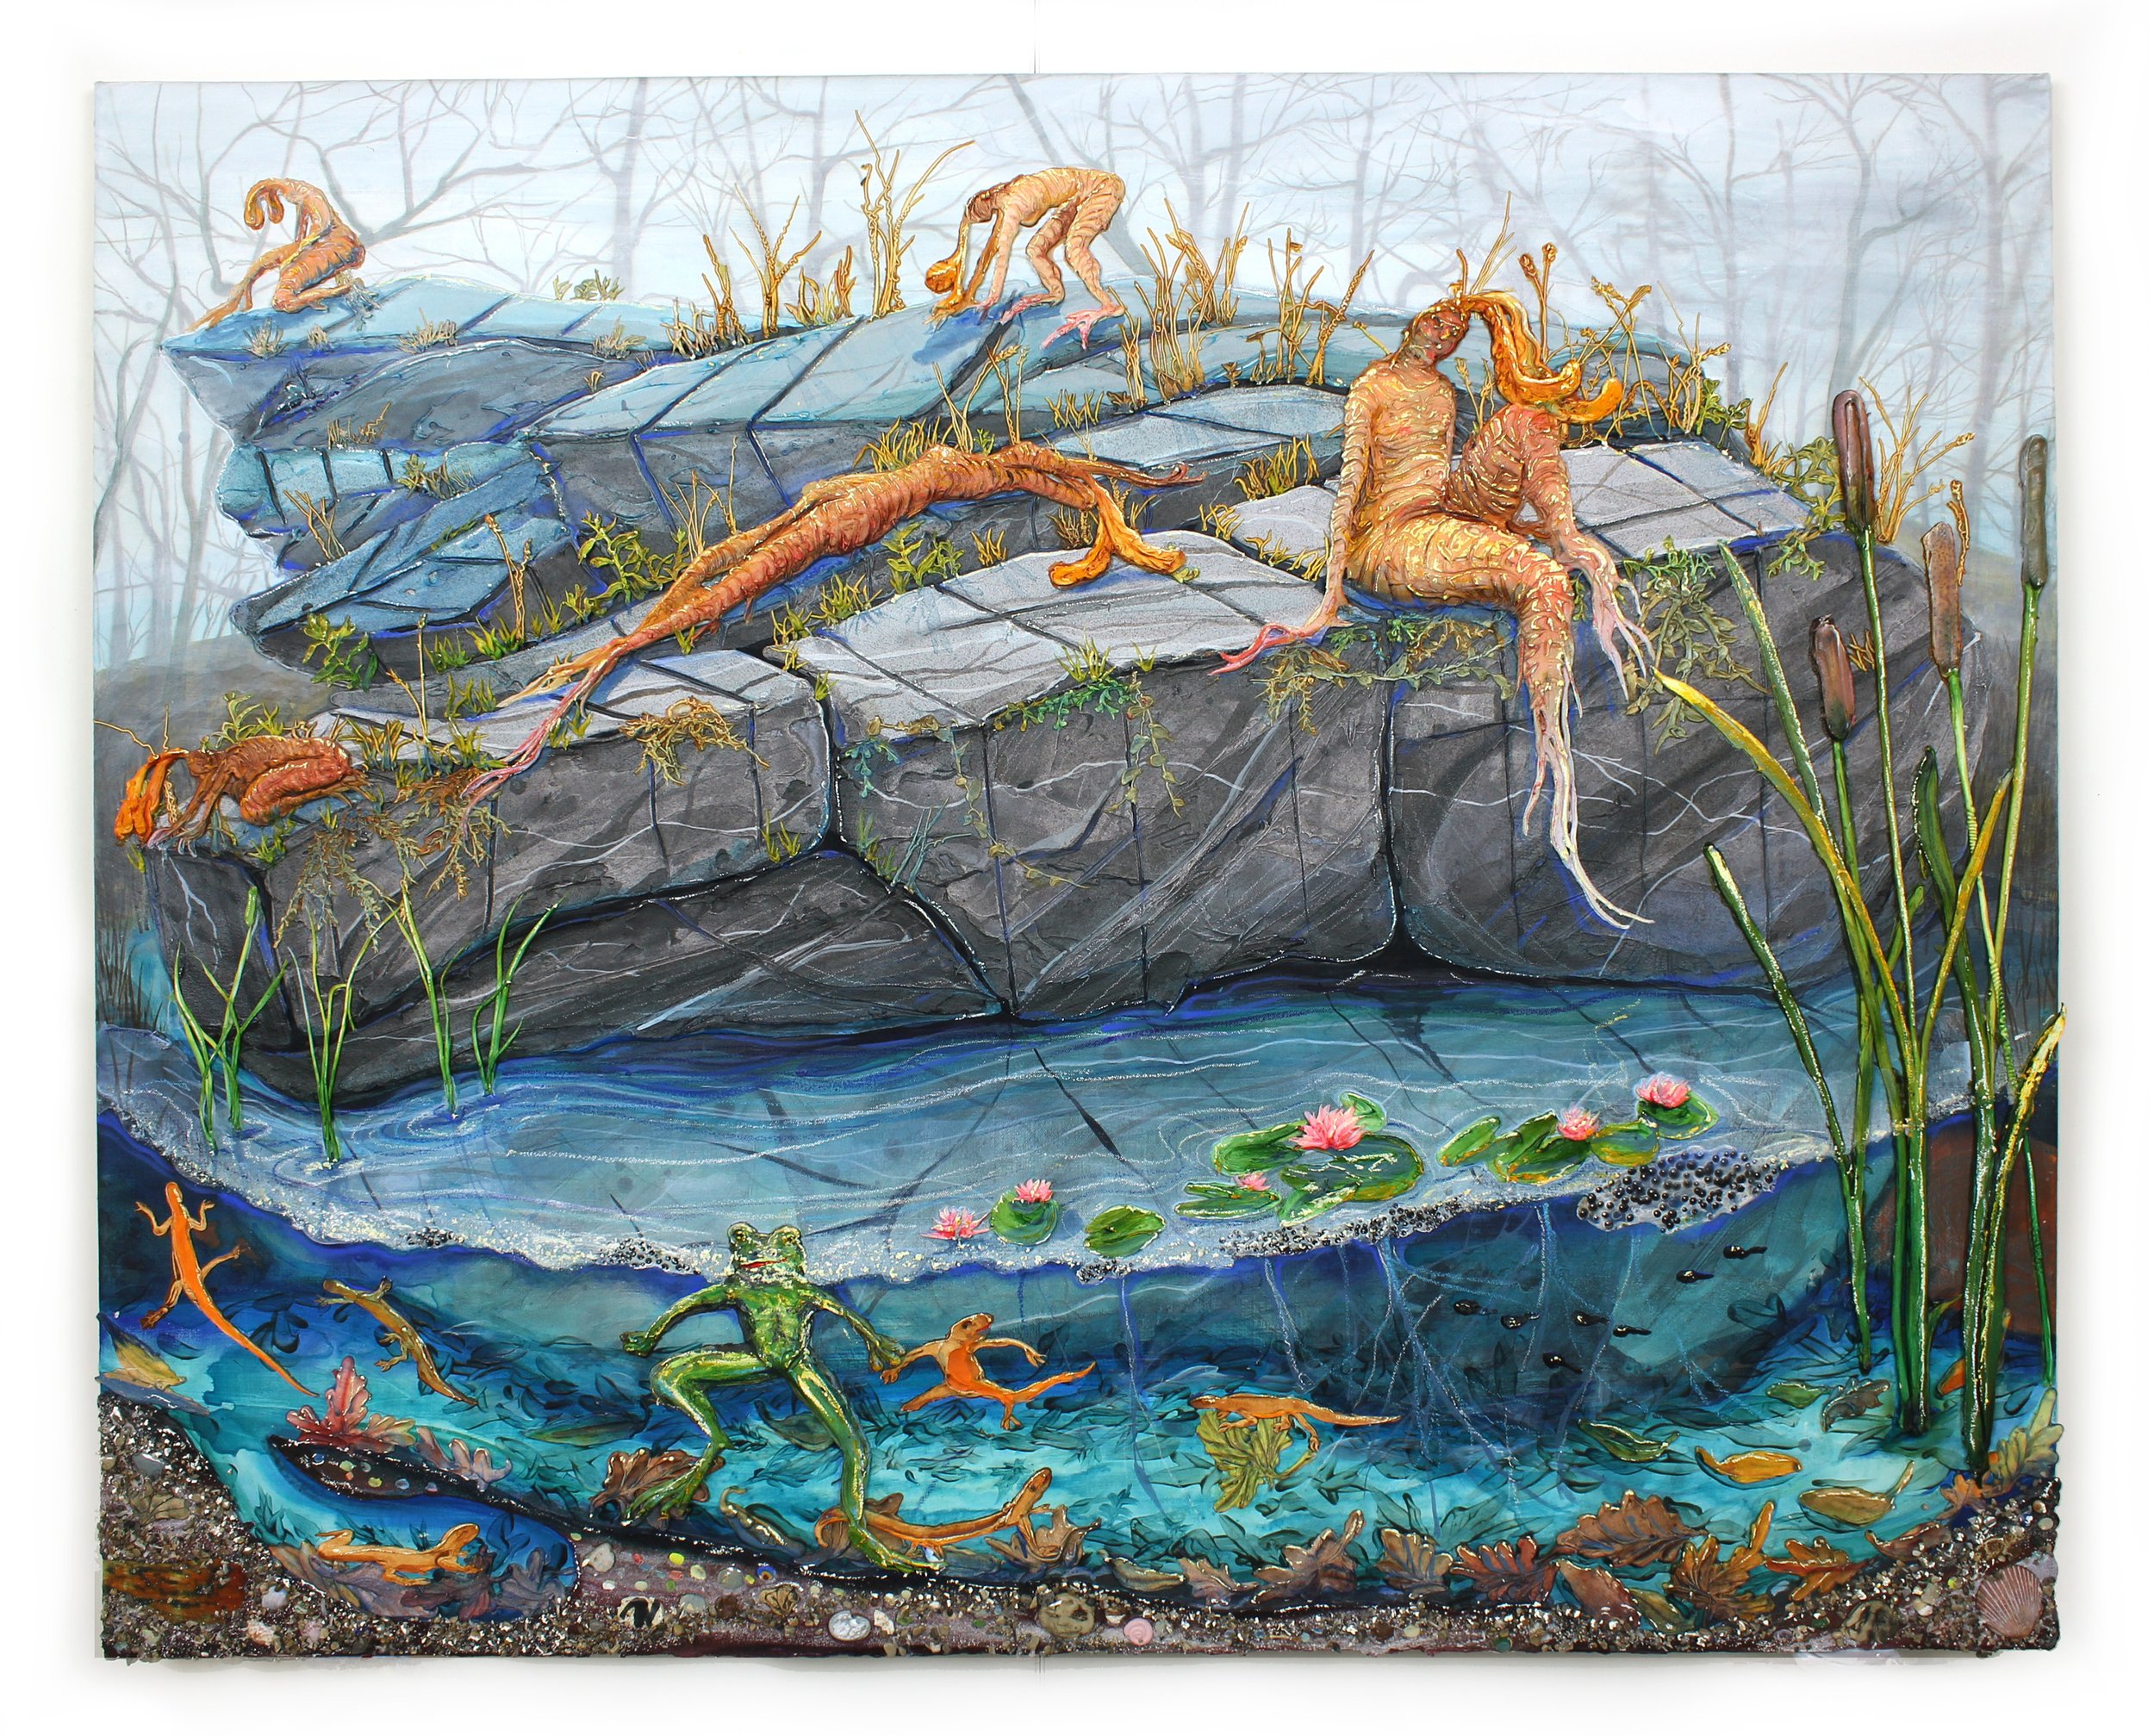   The Marble Quarry , 2021. Acrylic, pigment, flashe, pumice, sand, crushed garnet, ceramic, shells, chalk pastel, epoxy clay, rocks from Lake Michigan, and oil stick on canvas, 40 x 50.5 x 2 in. (101.6 x 128.3 x 5.1 cm) 